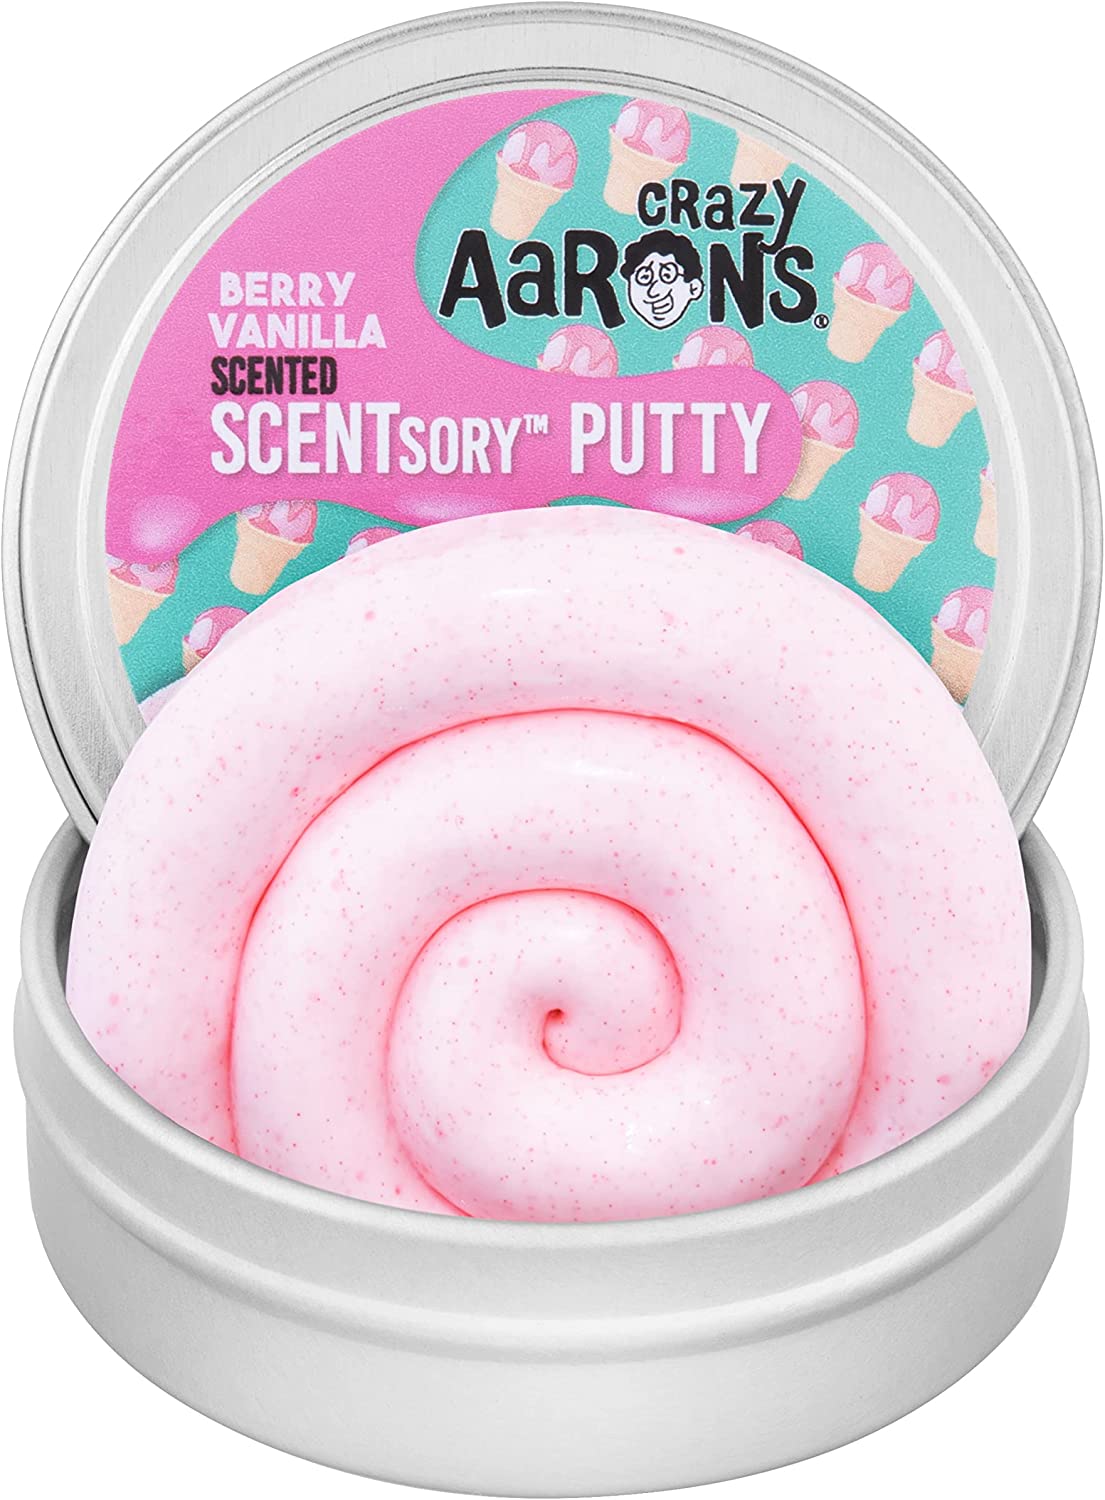 Scentsory Putty - Scoopberry